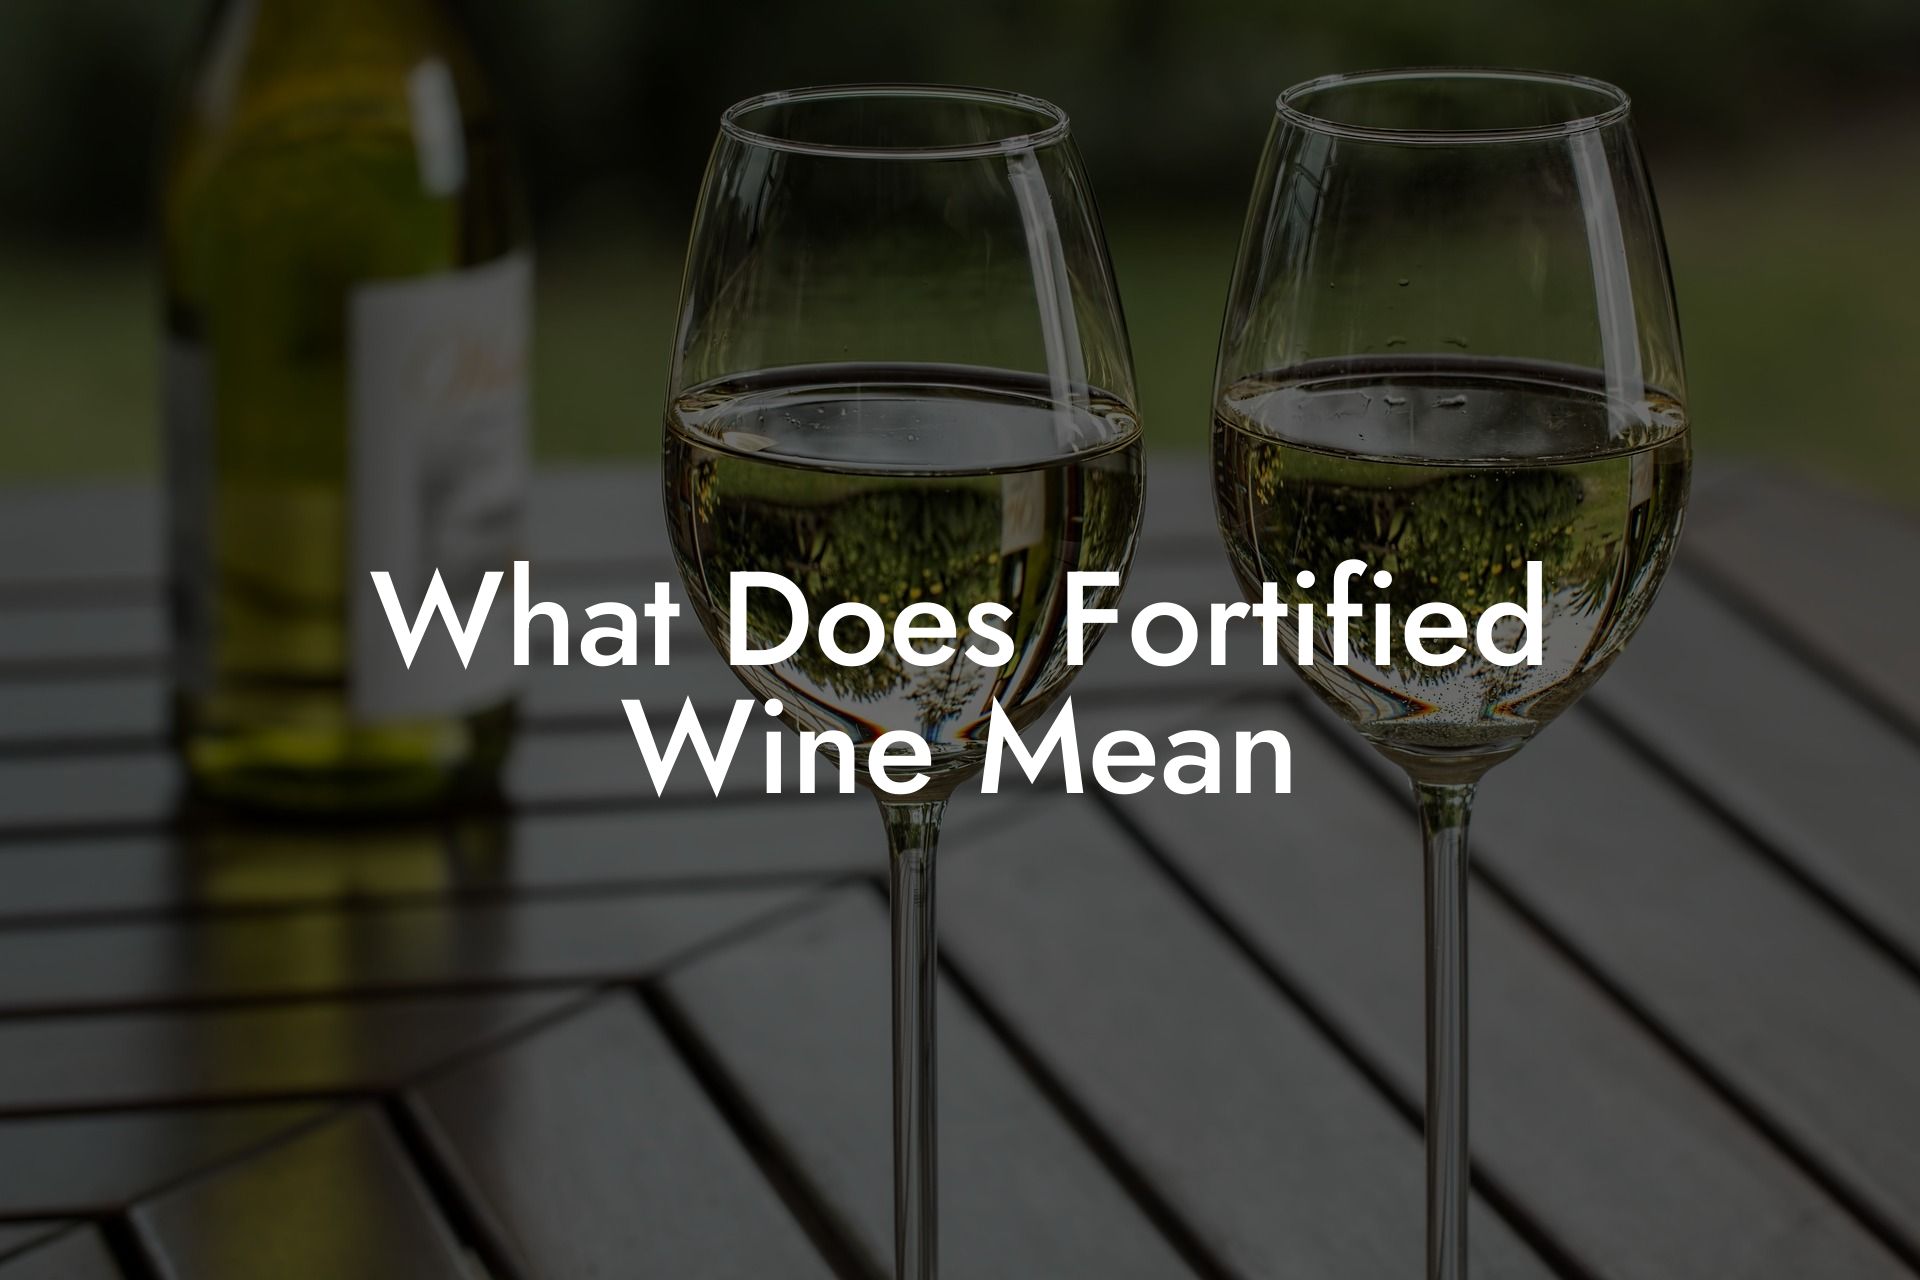 What Does Fortified Wine Mean